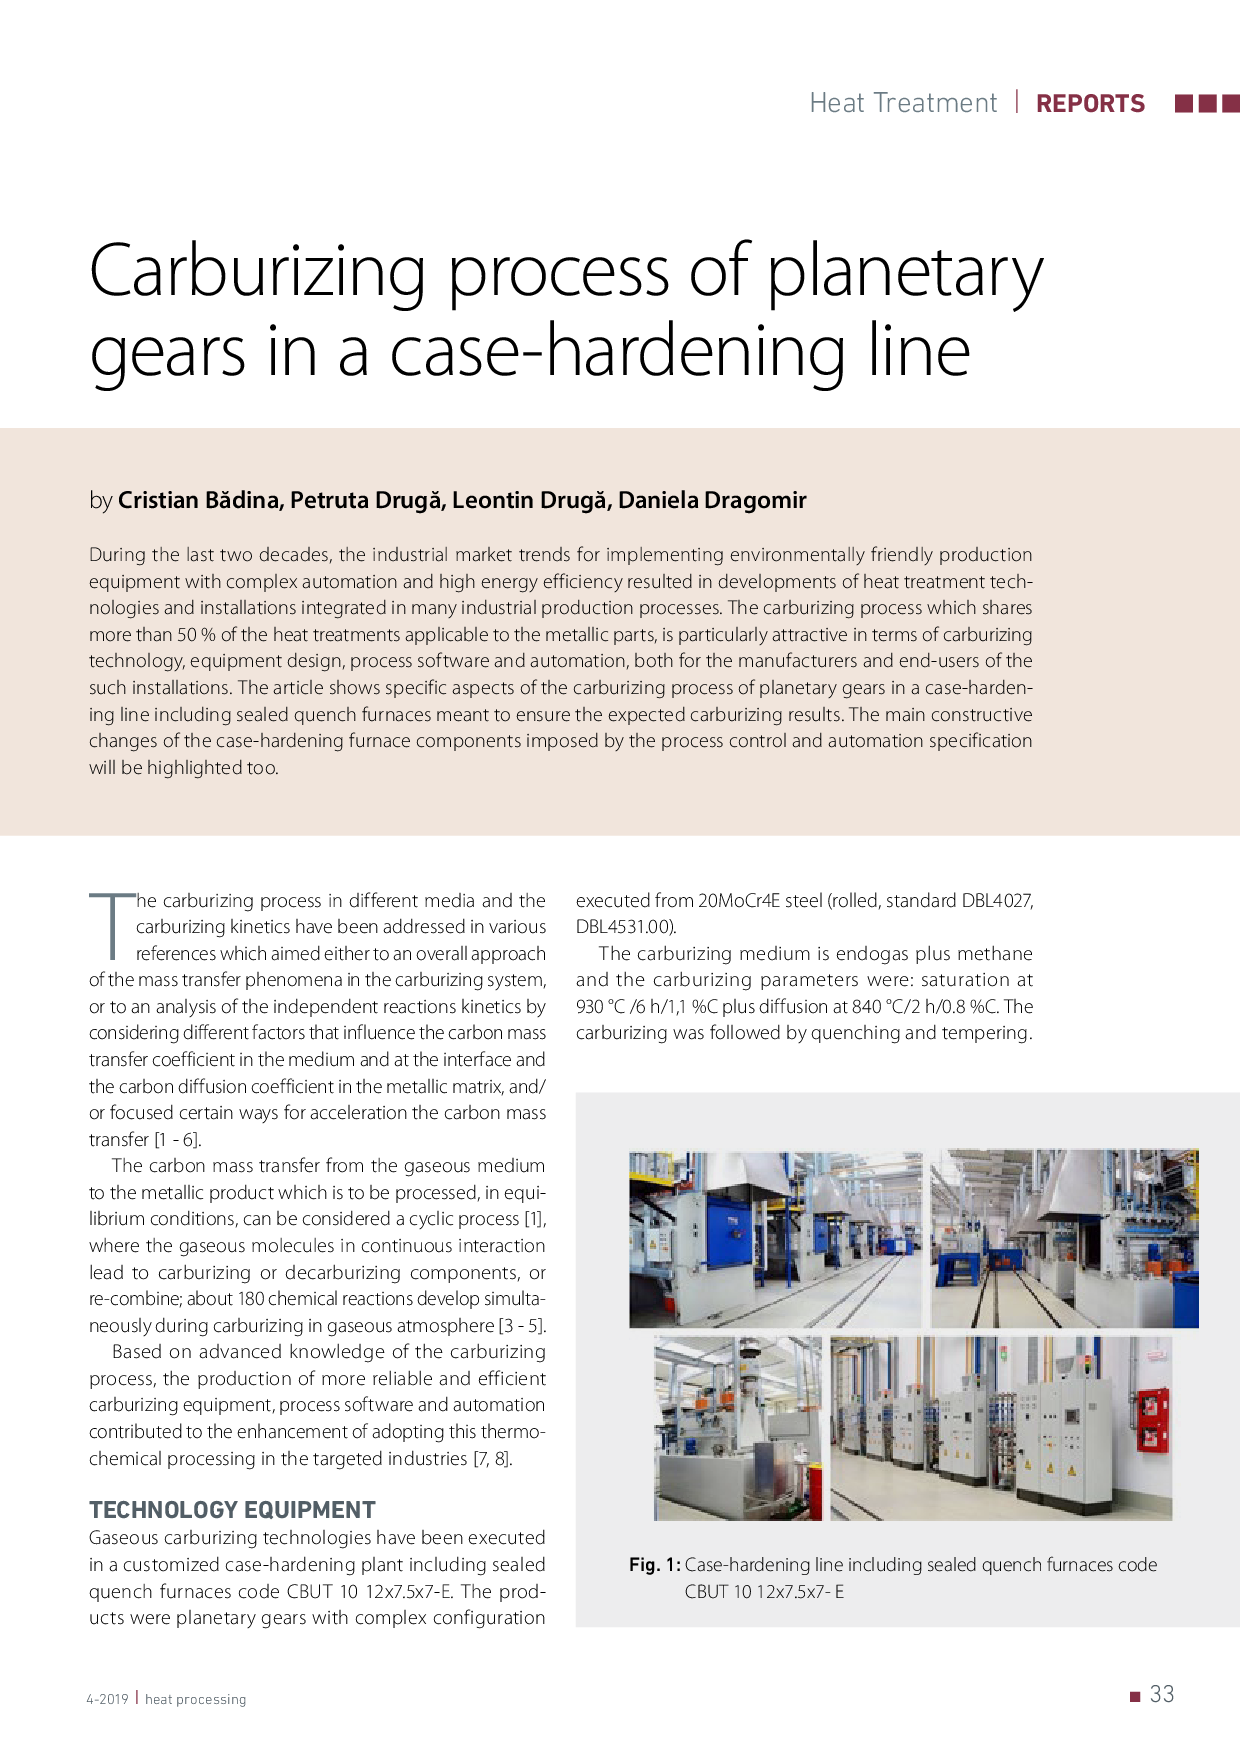 Carburizing process of planetary gears in a case-hardening line